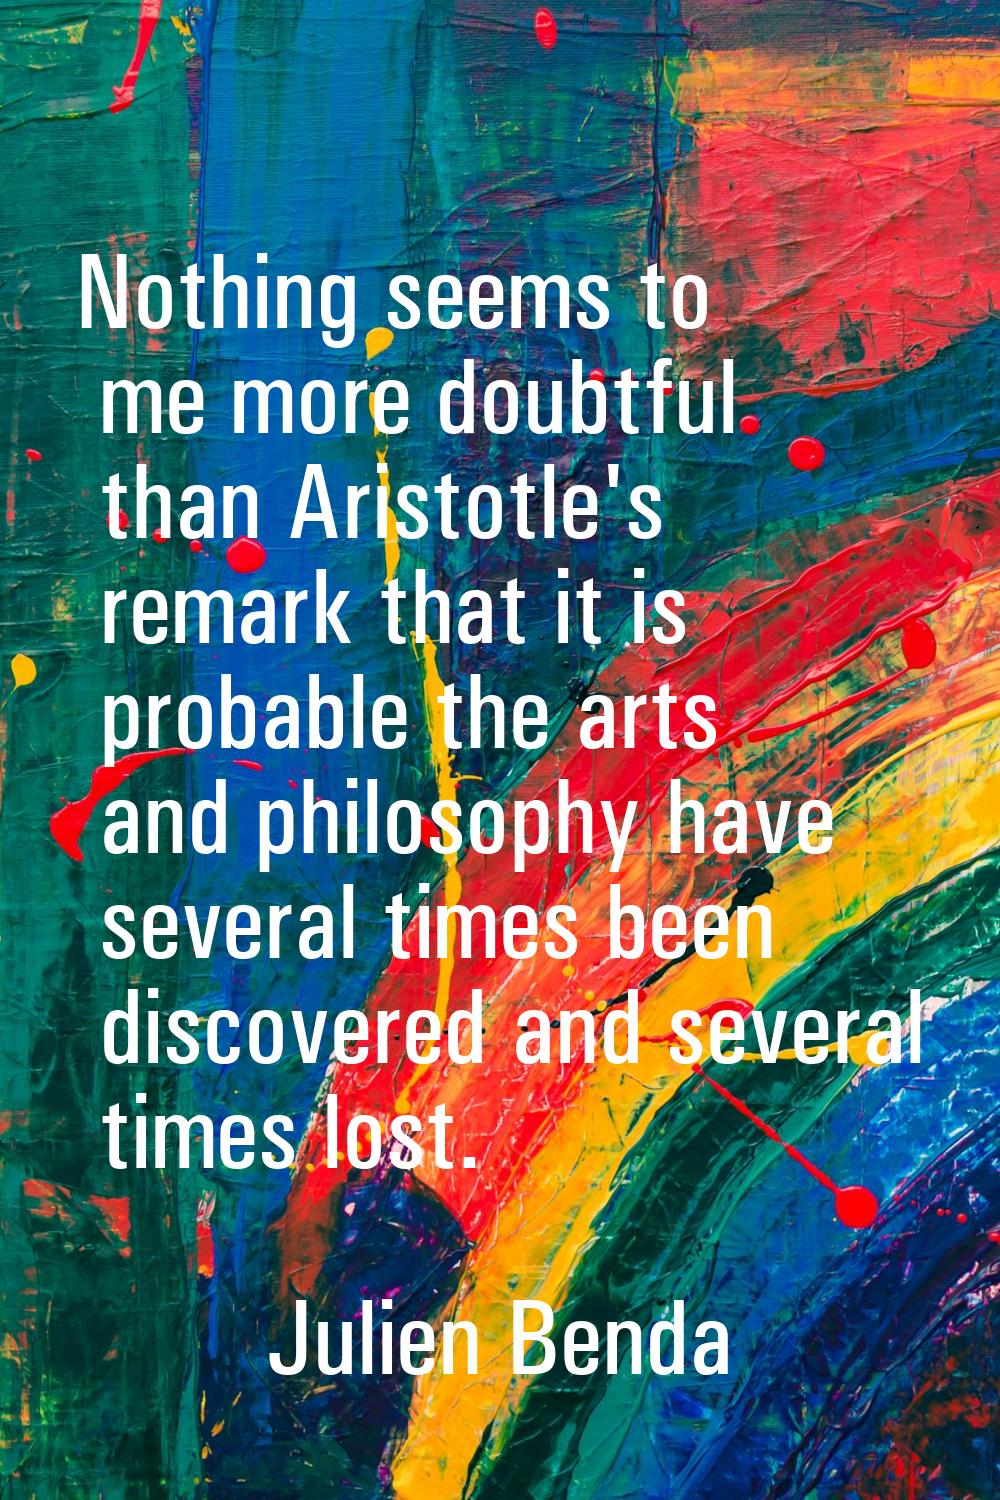 Nothing seems to me more doubtful than Aristotle's remark that it is probable the arts and philosop